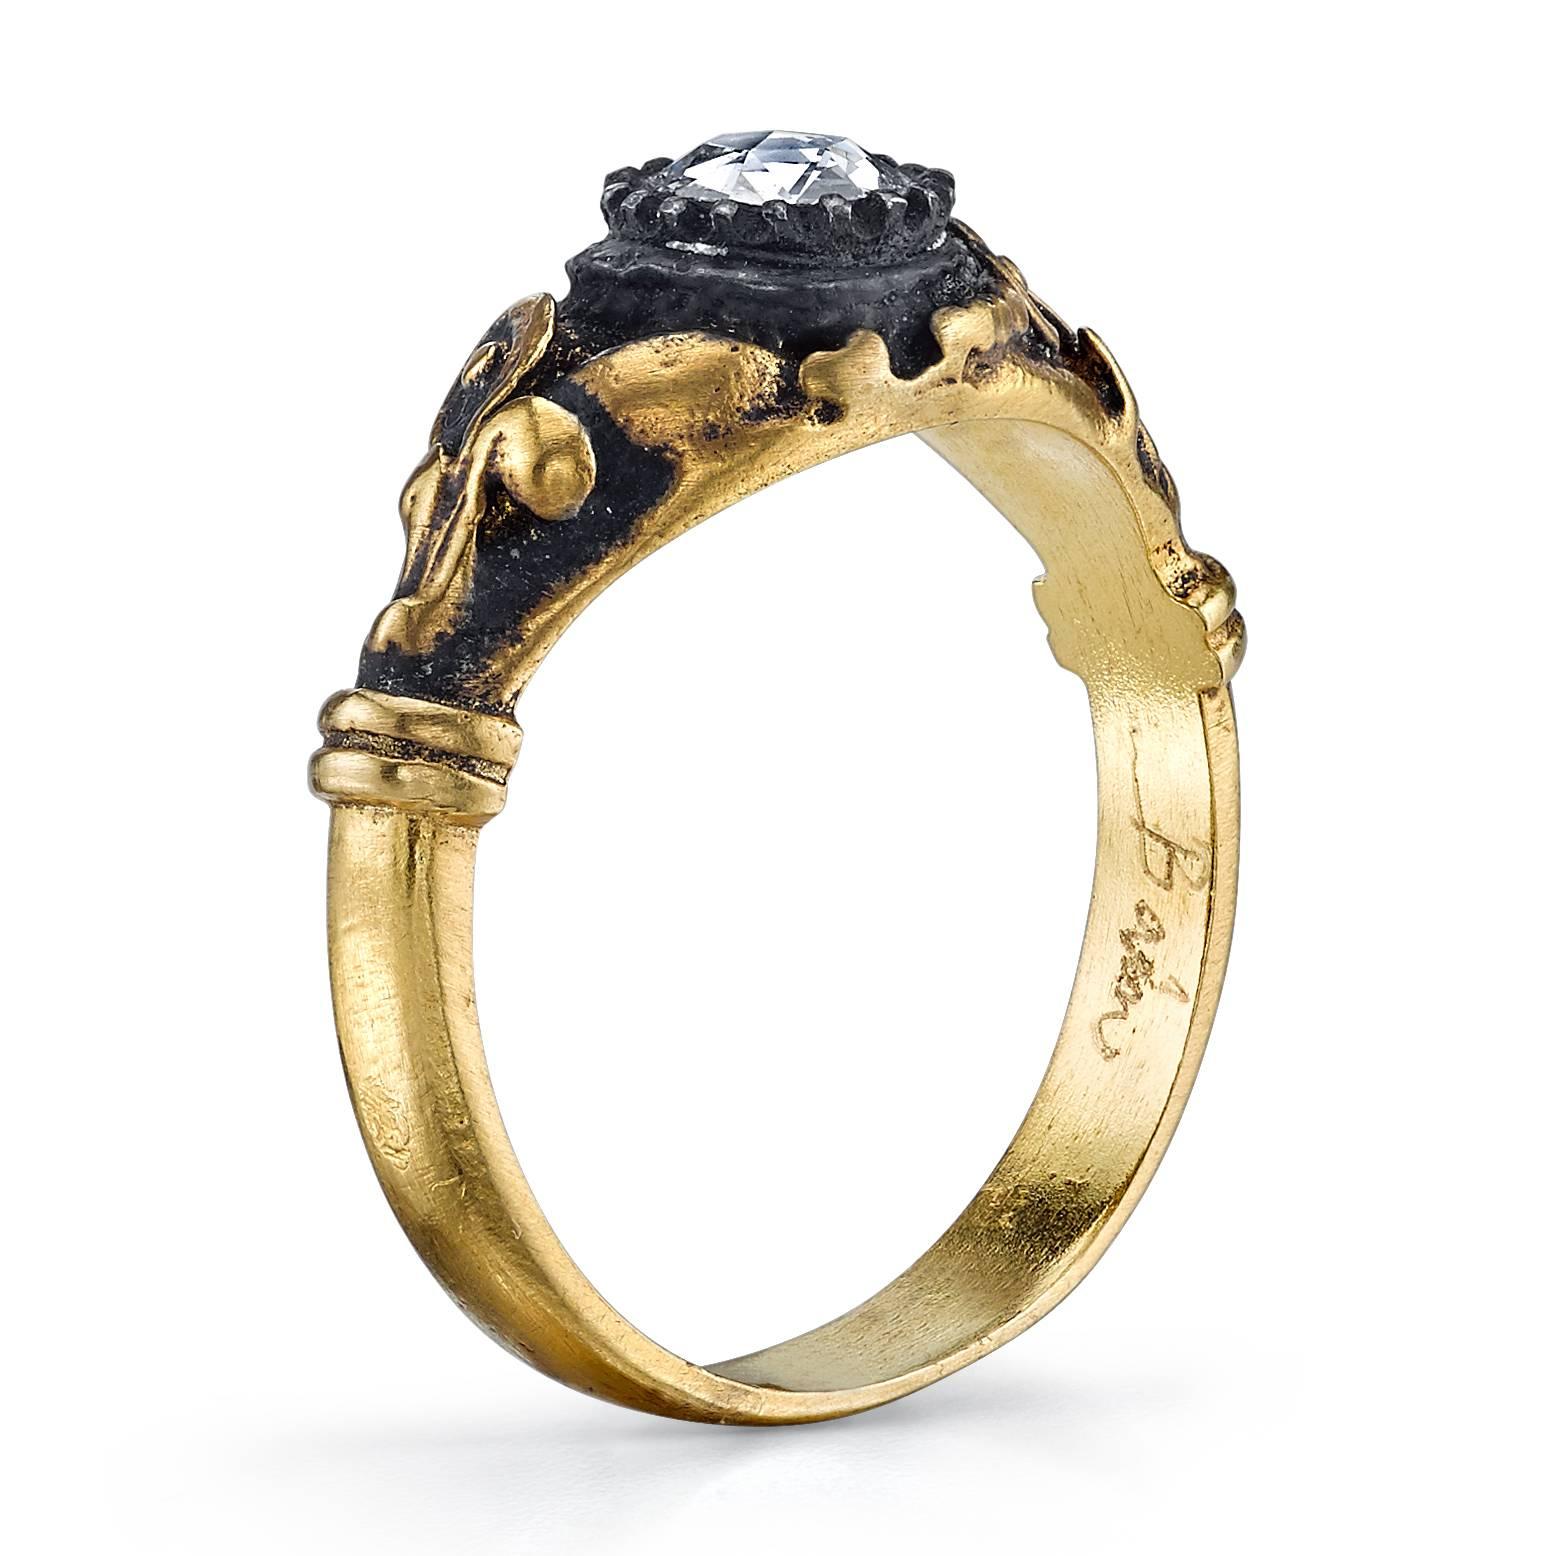 18 Karat Yellow Gold and 0.22 CT Rose Cut Diamond Ring, accented with Silver Patina. 

Inspired by the Edwardian Era, a time when fine jewelry was a crucial component of every outfit, pieces were created to compliment the silk and lace worn by